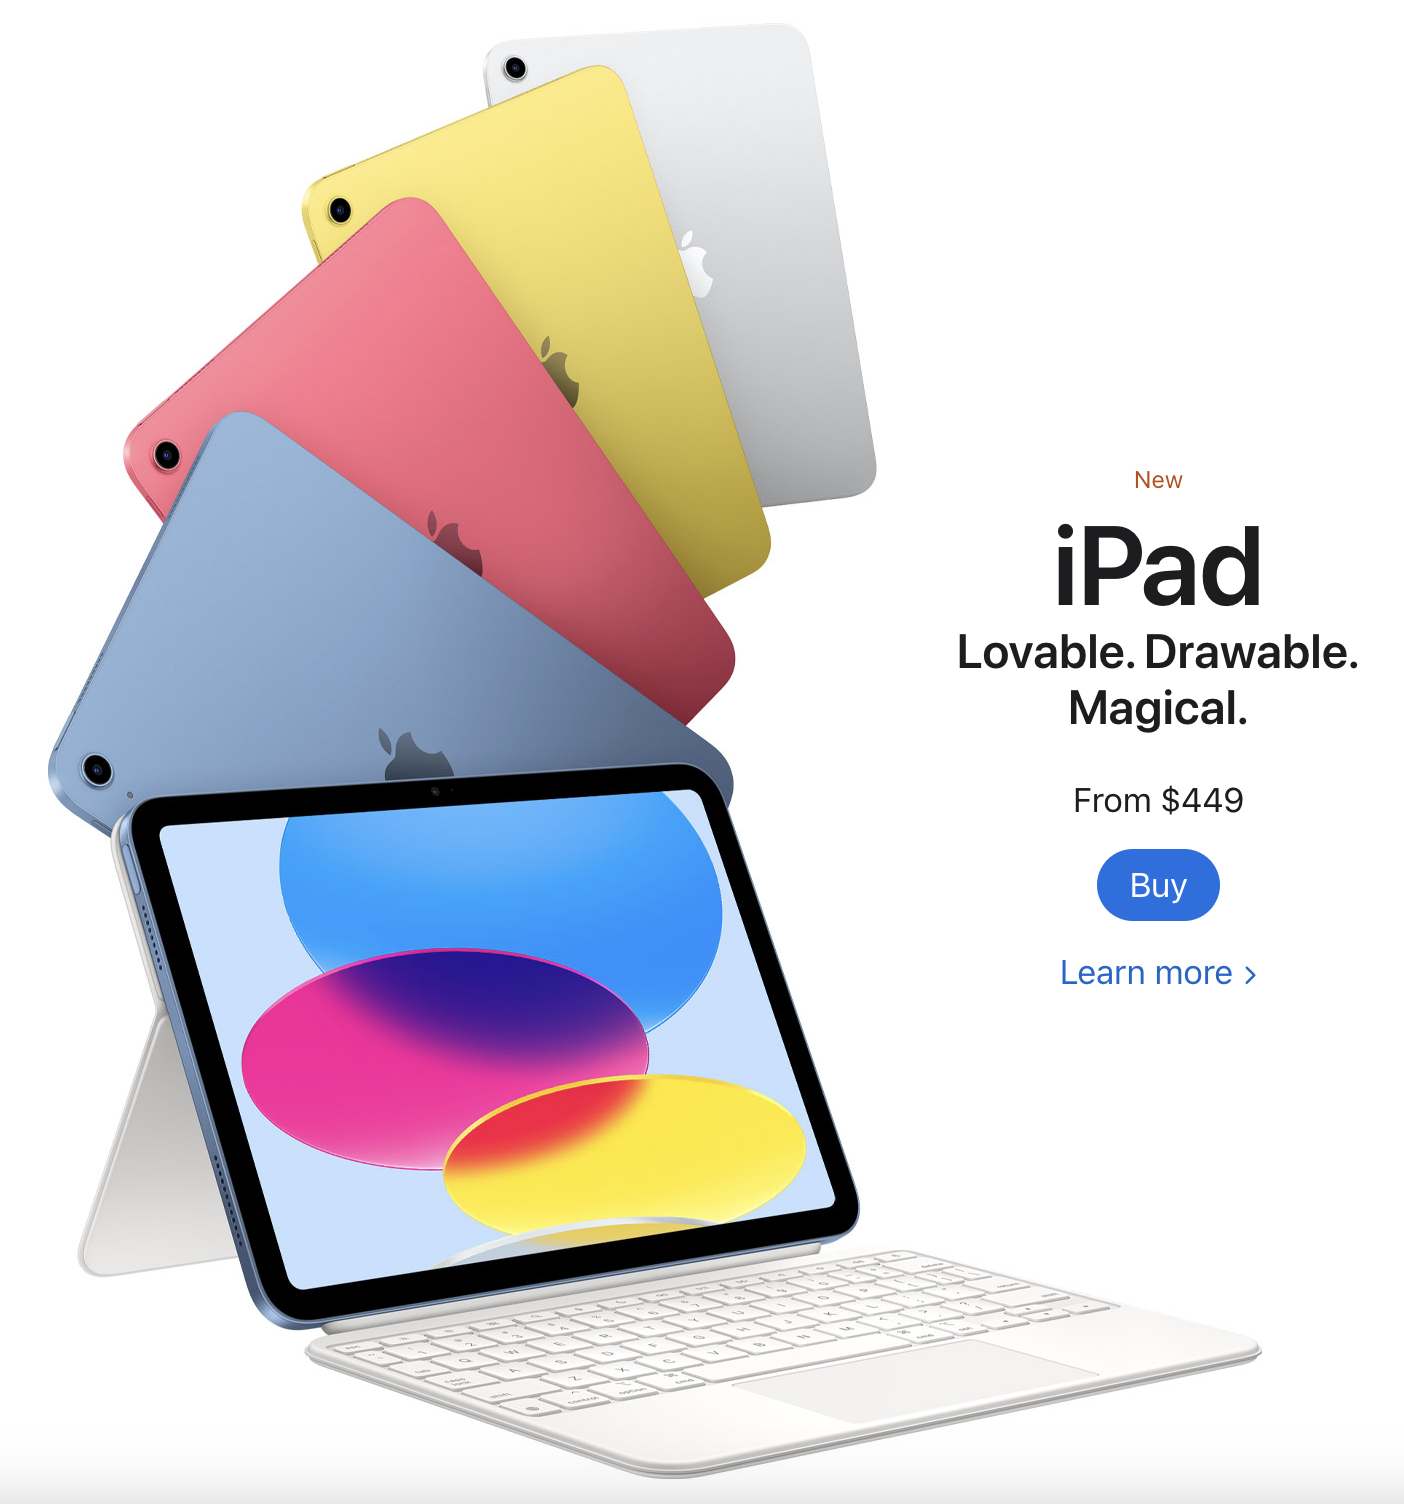 concise content on apple’s landing page